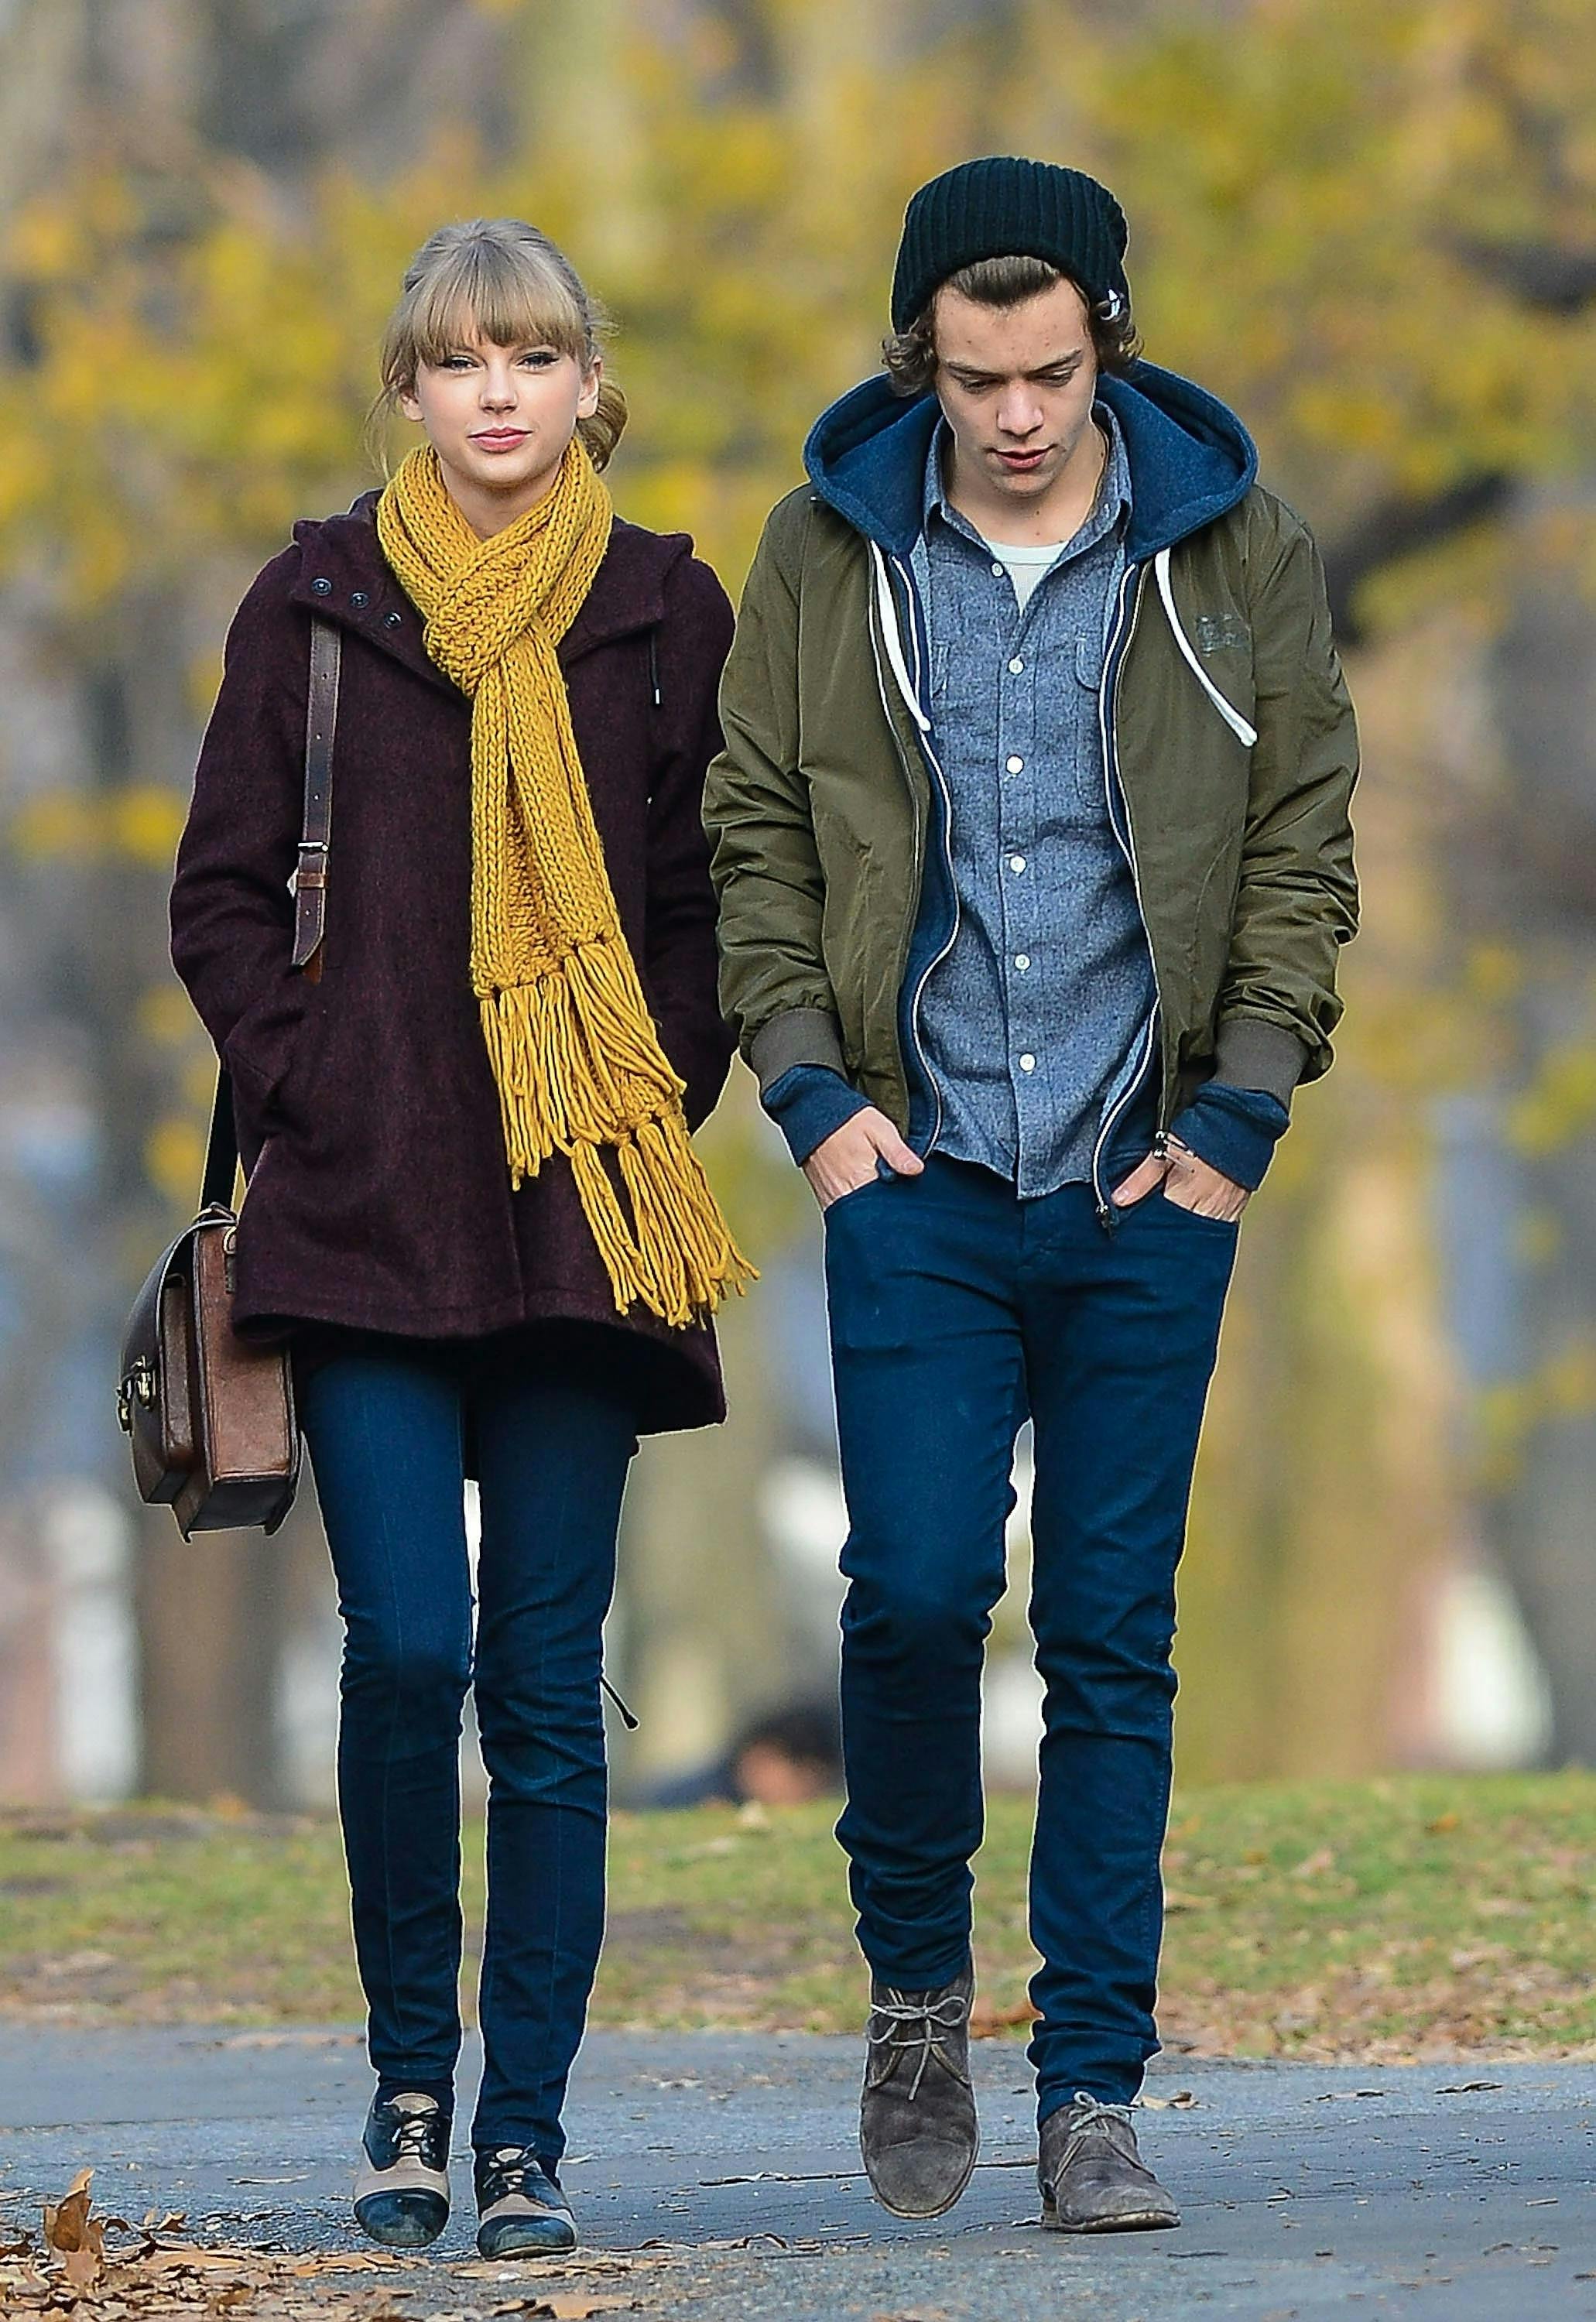 taylor swift and harry styles walking in a park